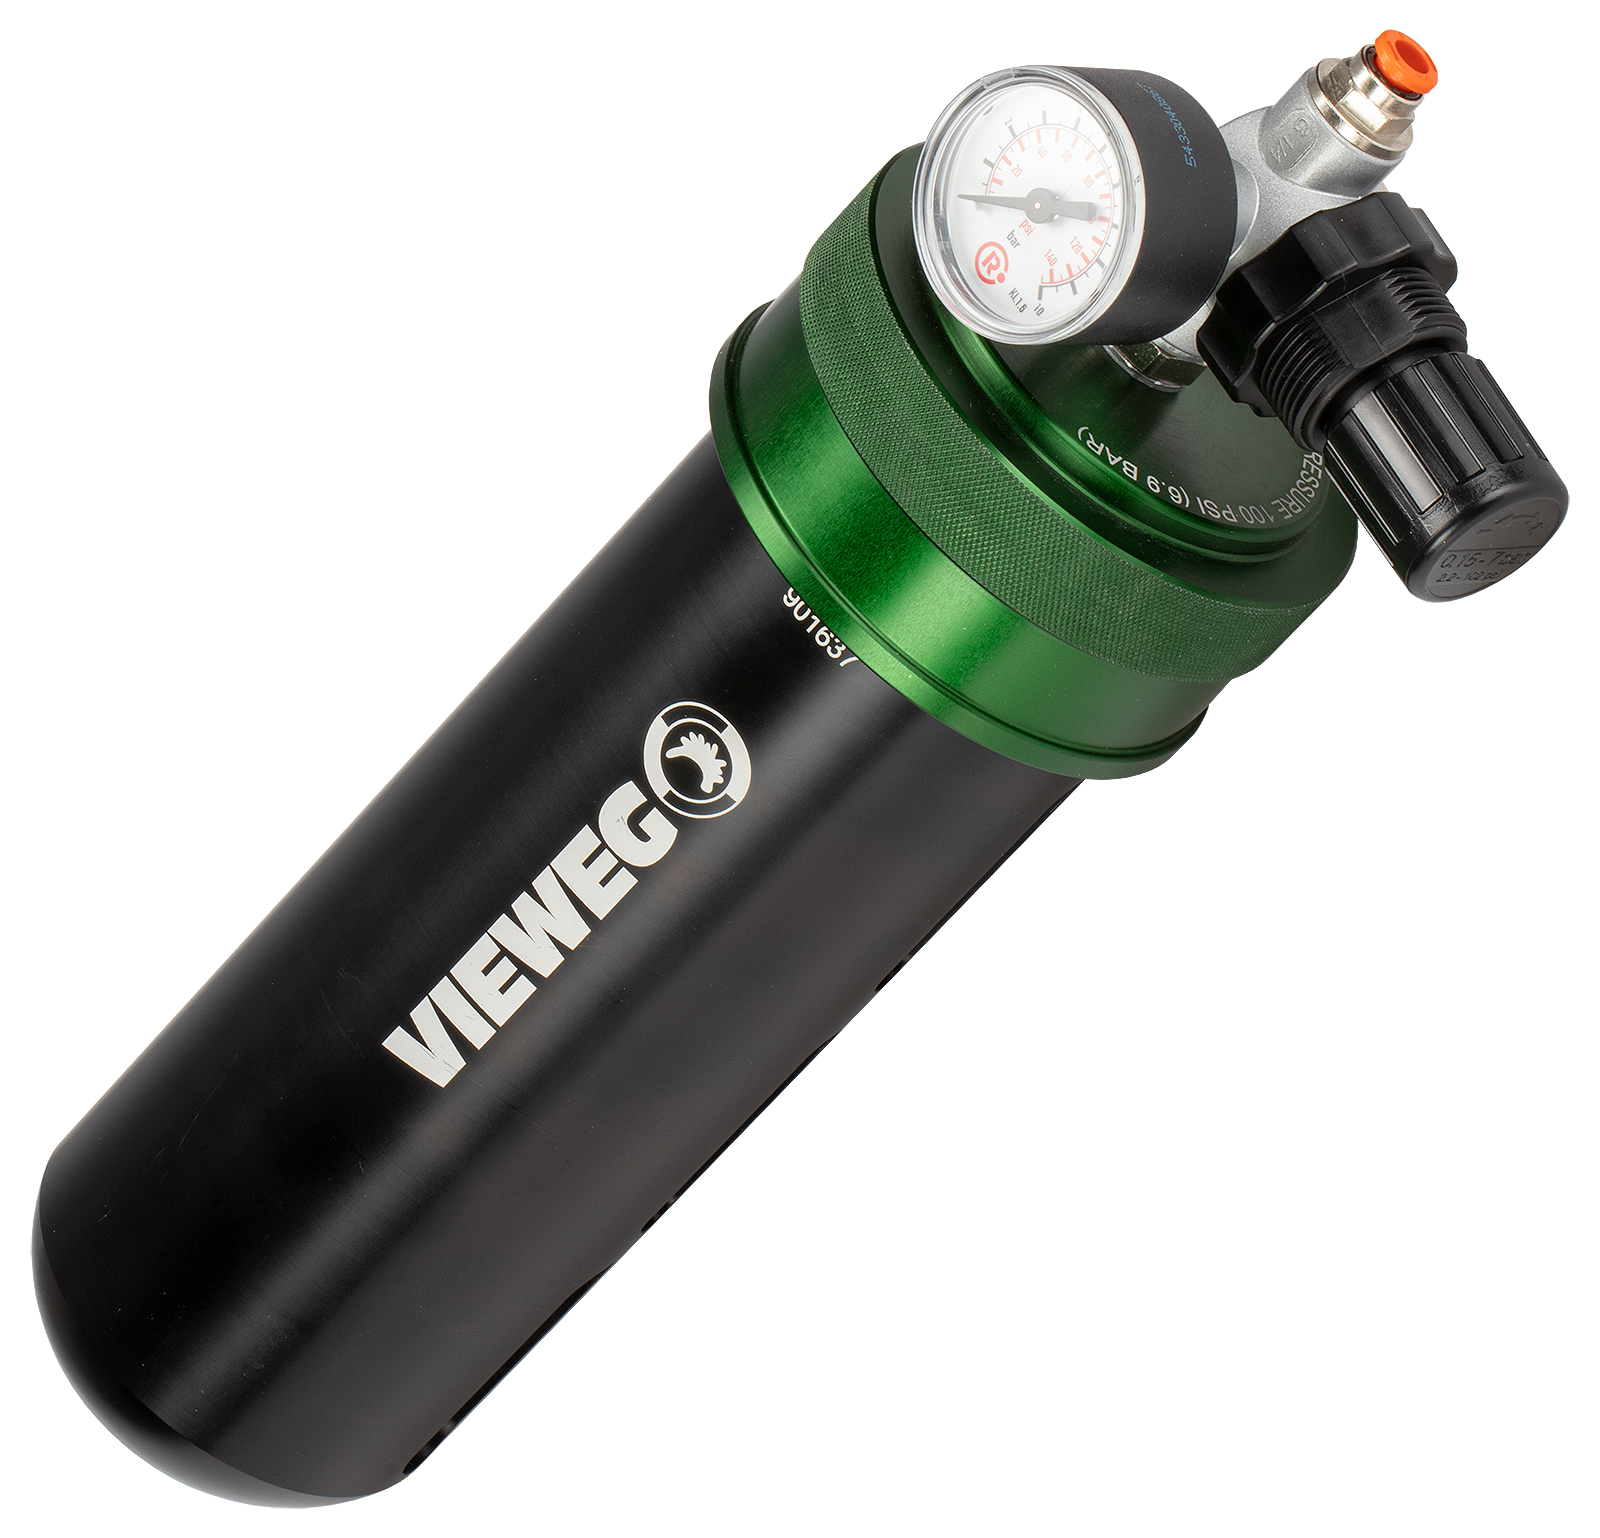 Cartridge sleeve 600 cc with closing cap and pressure gauge